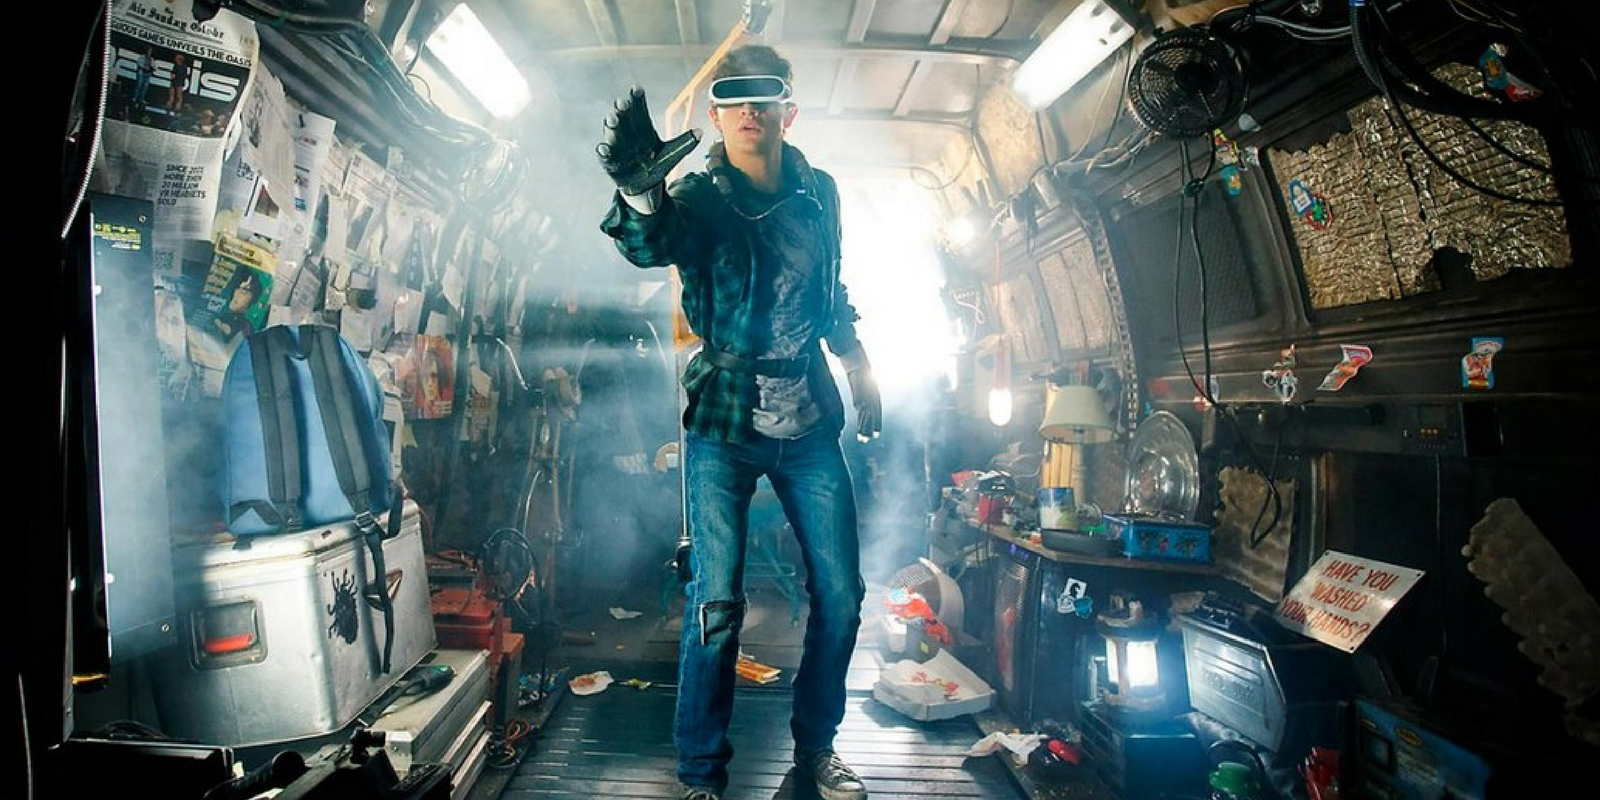 A Sneak Peek at the Upcoming Ready Player One Film